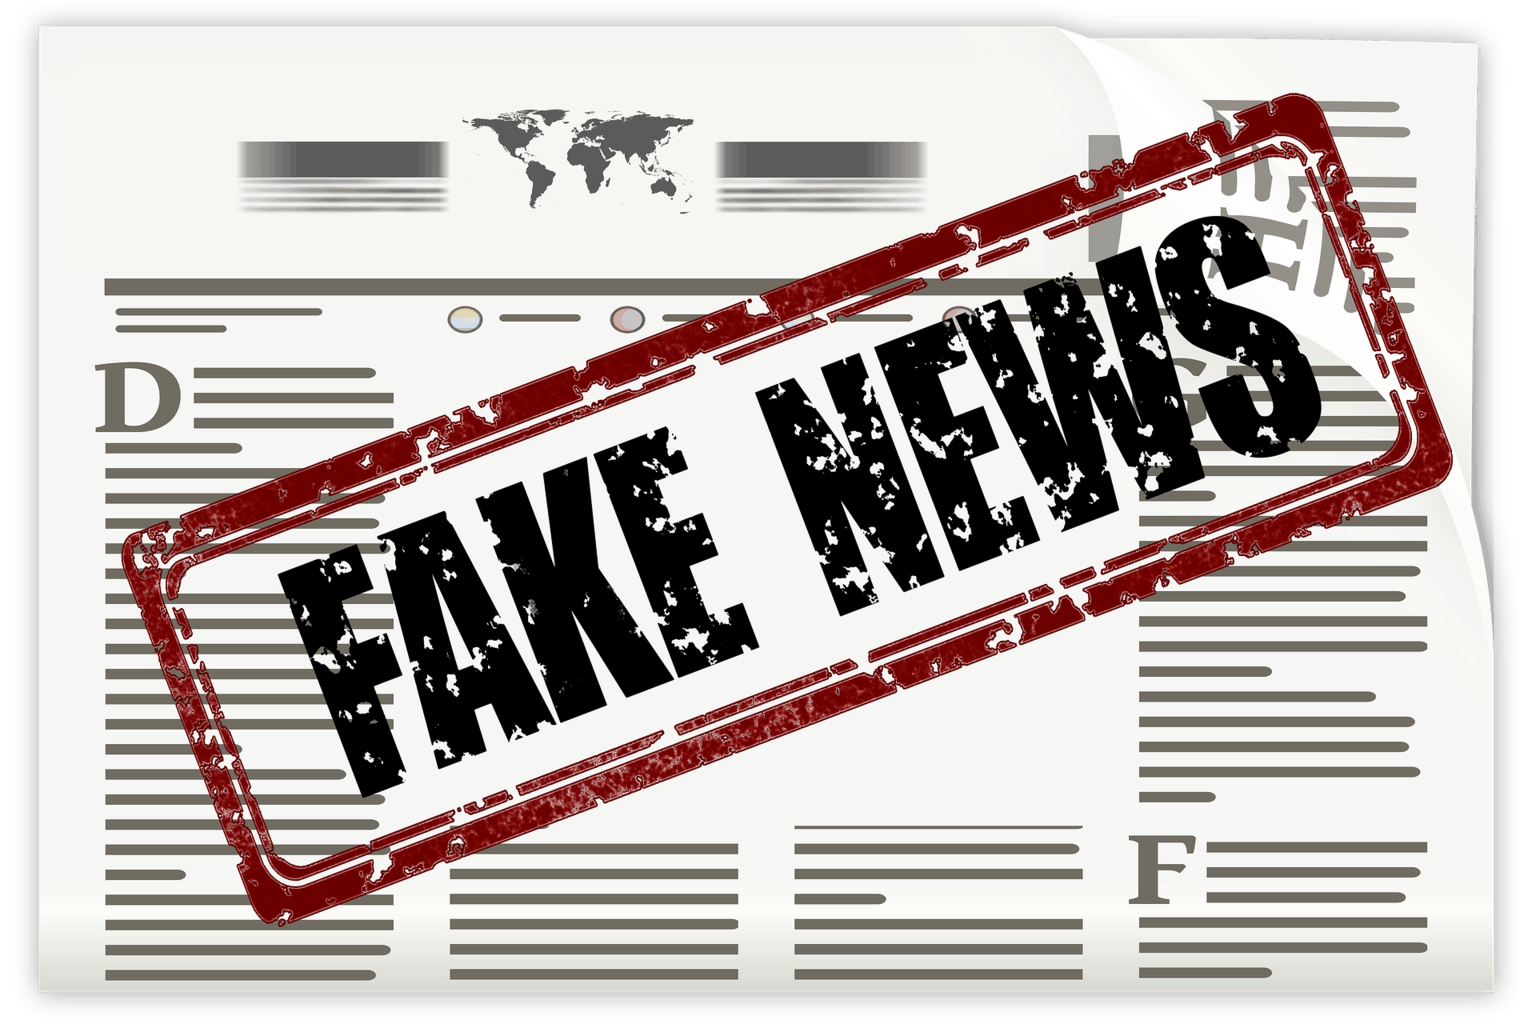 phentermine myths - an illustration of a newspaper with the stamp 'FAKE NEWS'